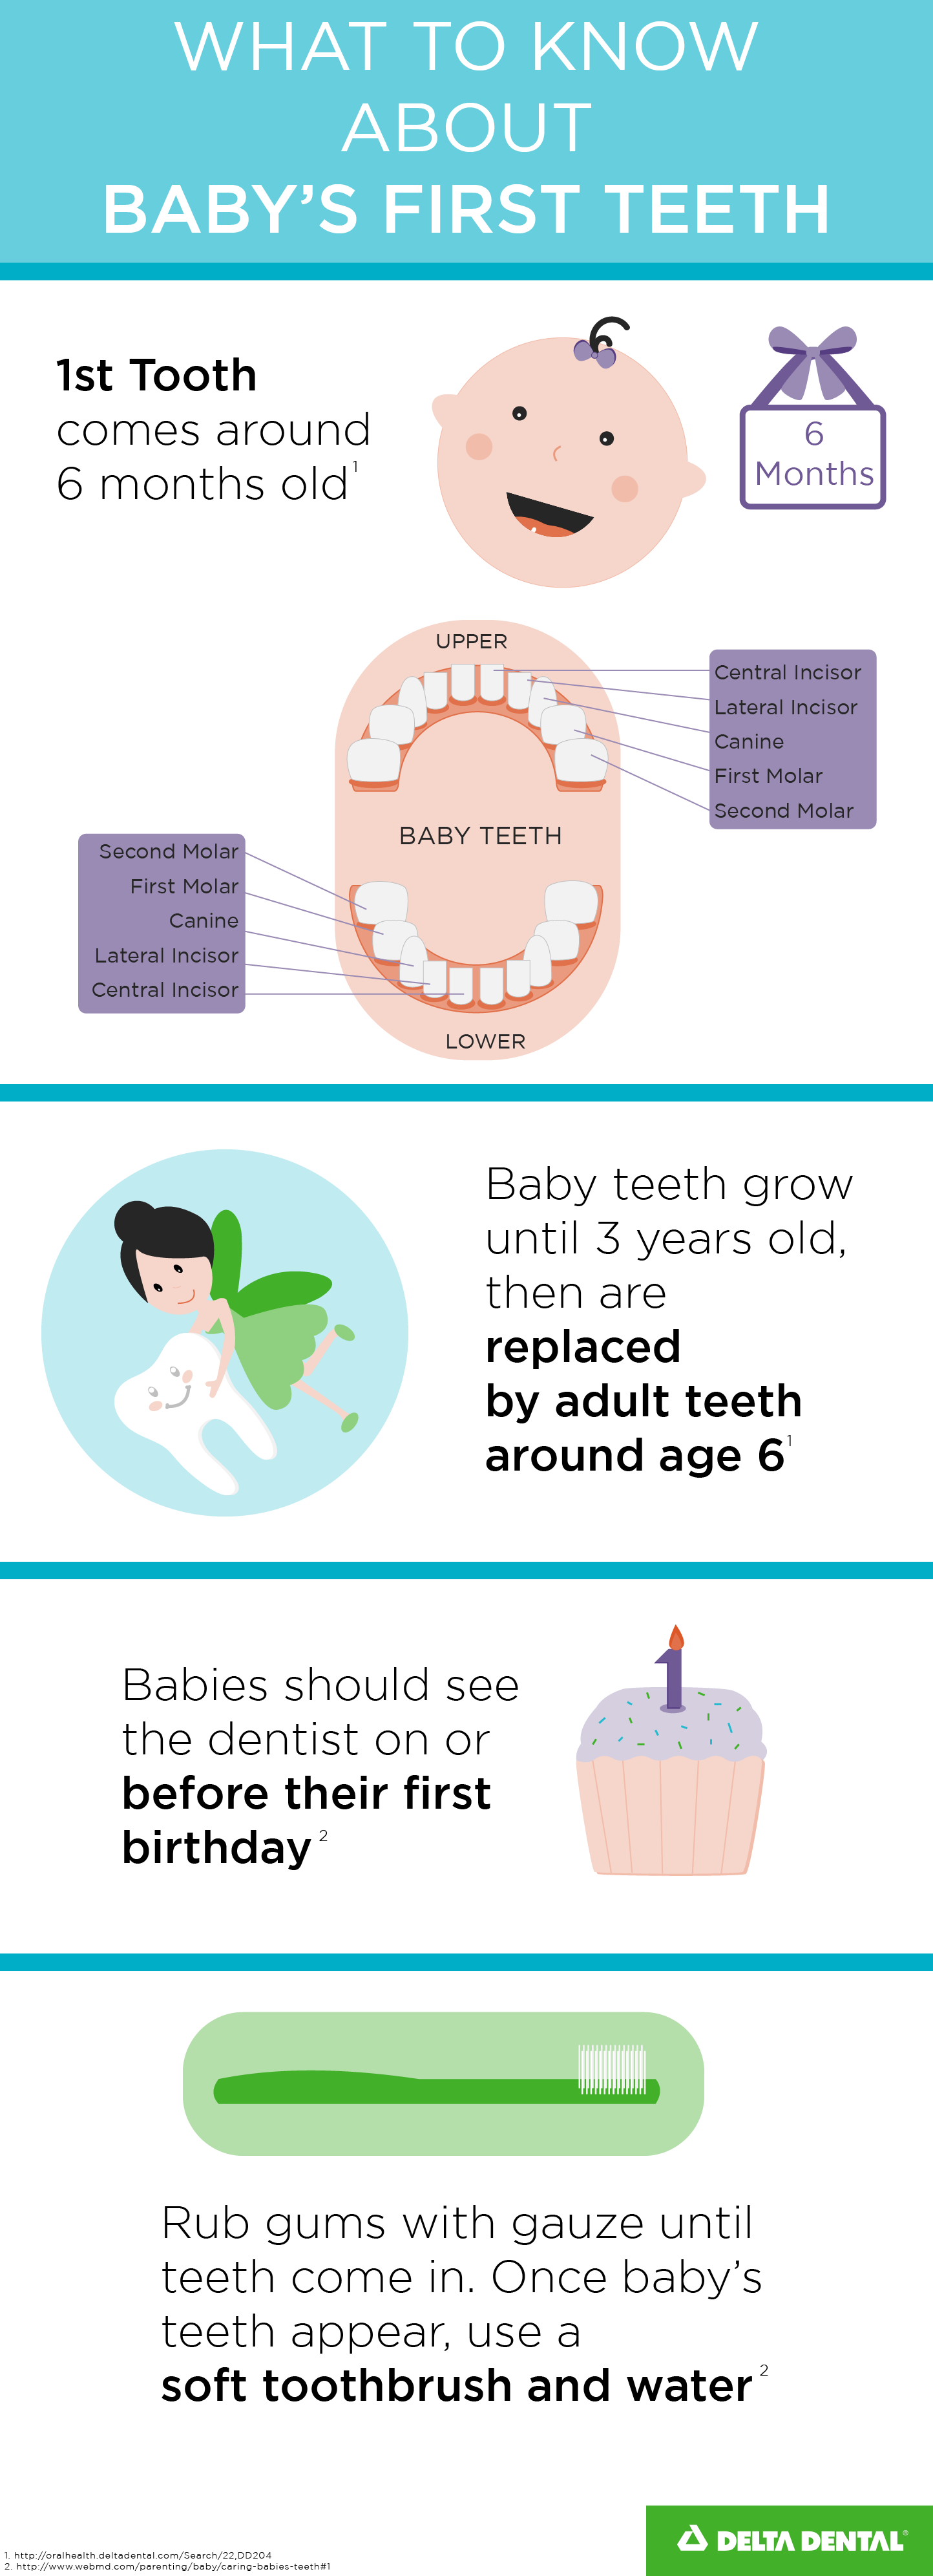 how to care for babies teeth and gums